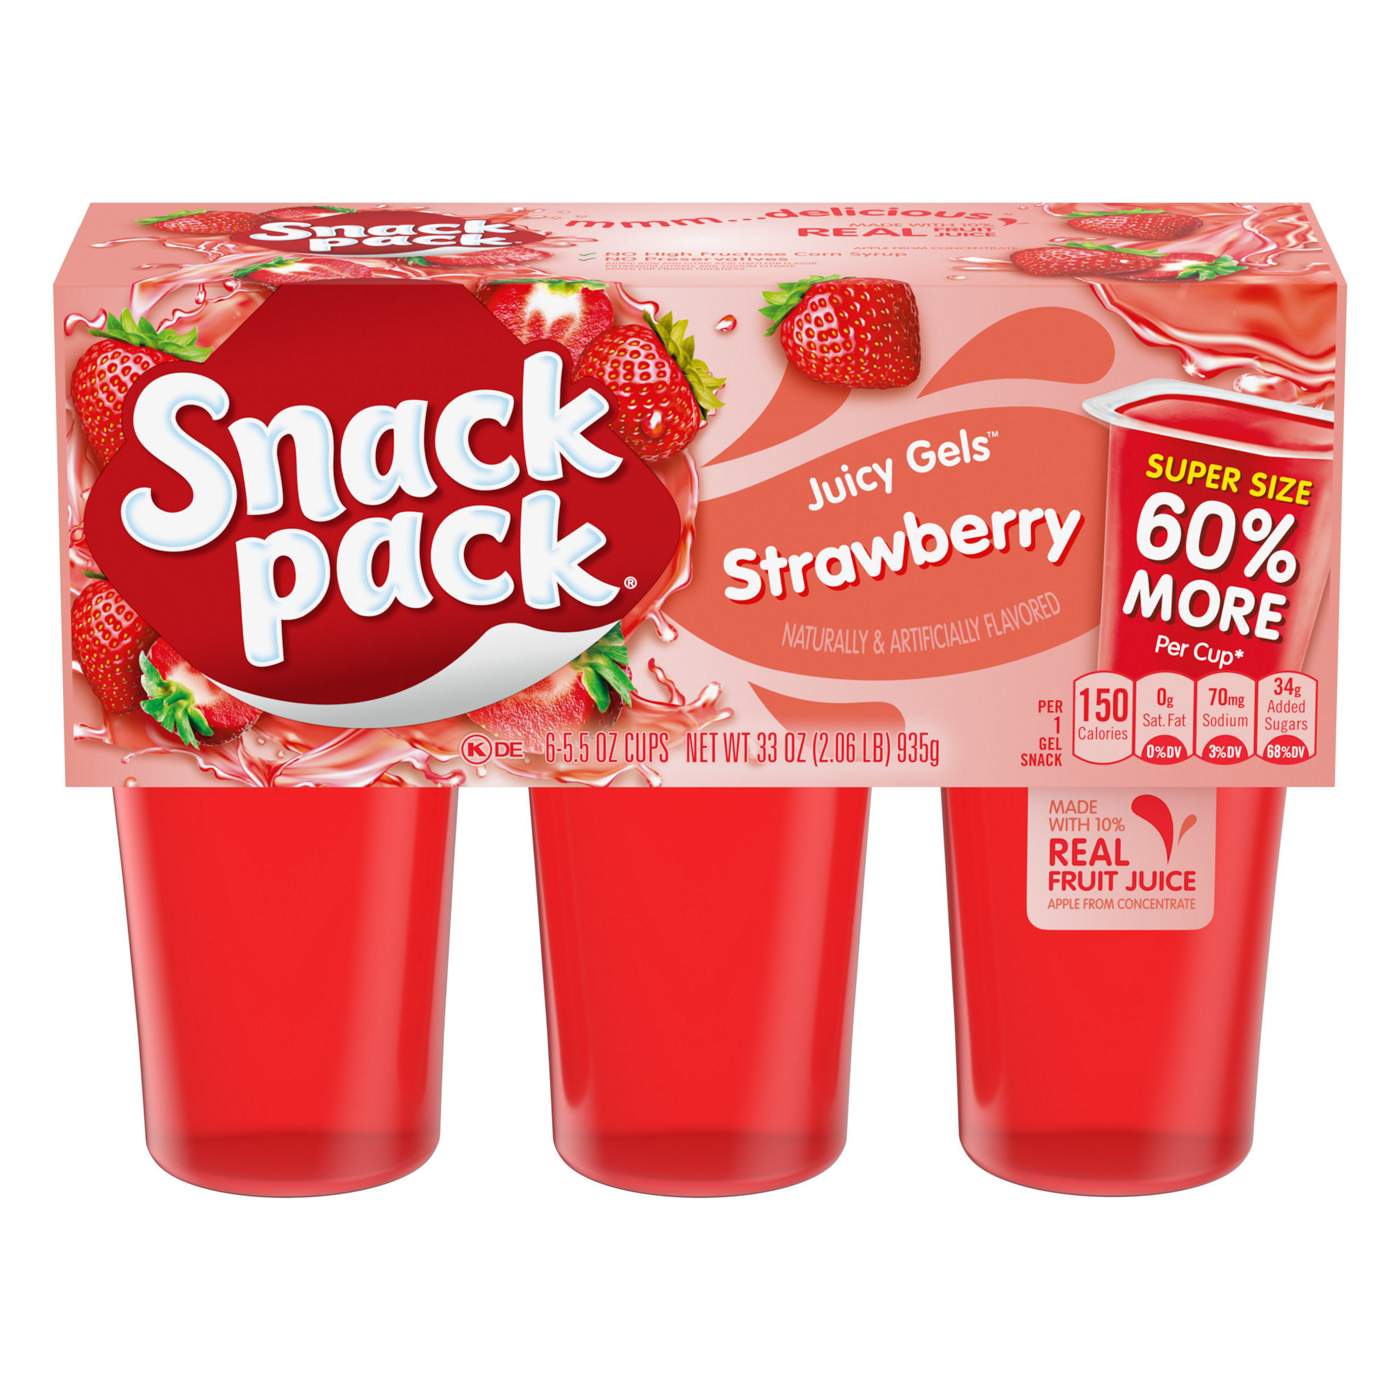 Snack Pack Super Size Strawberry Juicy Gels Cups; image 1 of 5